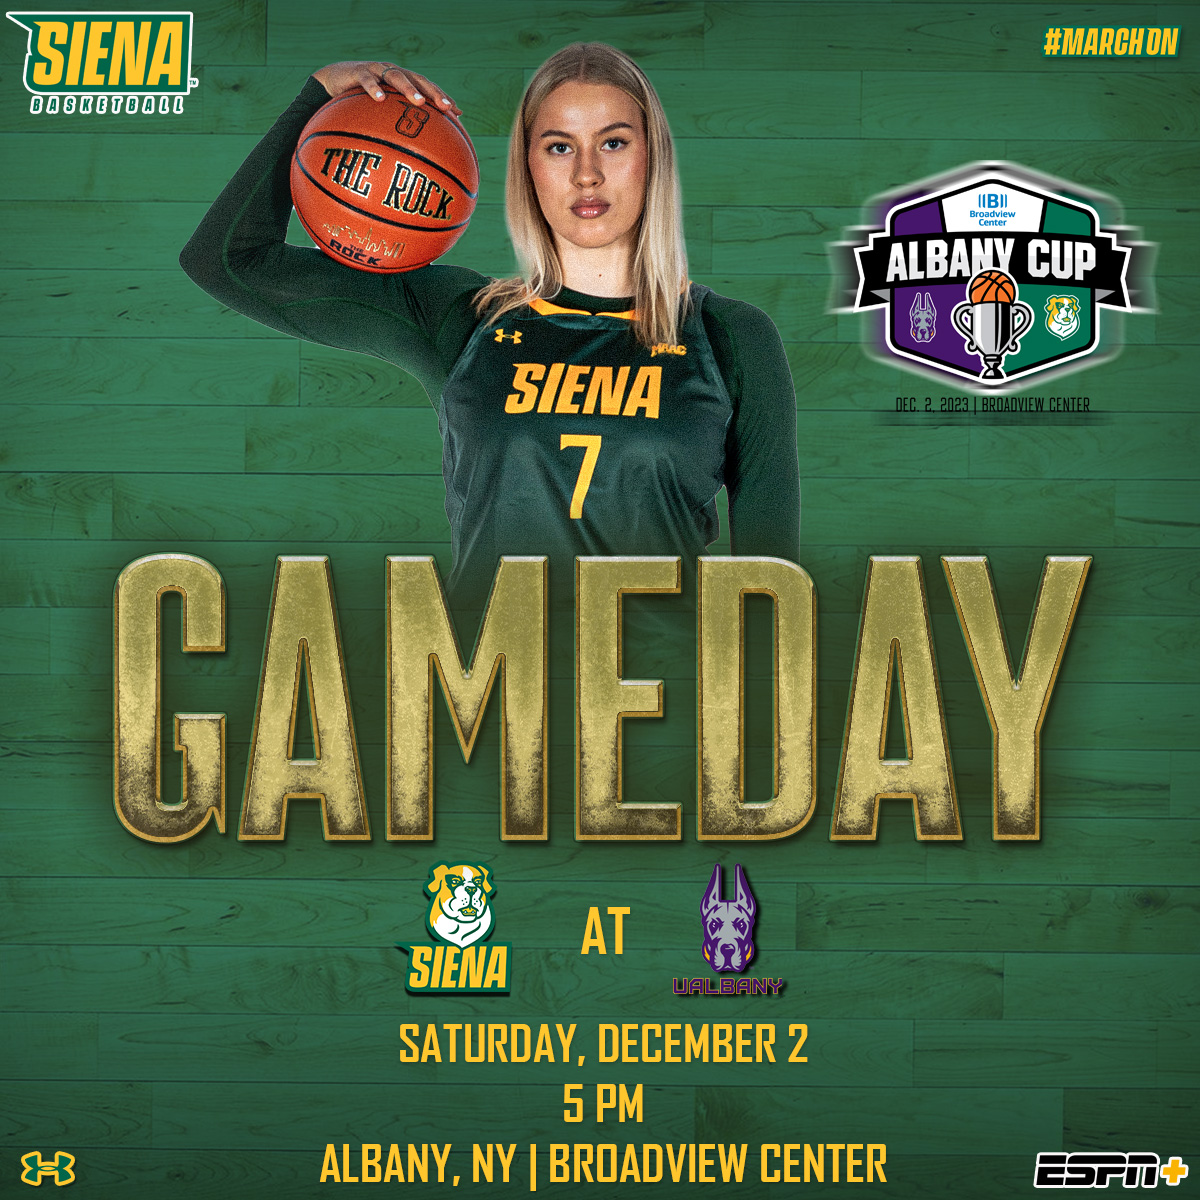 🏀 The battle for the 🏆 is ON❗️ @Siena_WBB 🆚 @UAlbanyWBB ⏰ 5⃣ PM 🏟️ Broadview Center 📍 Albany, NY 📺 @ESPNPlus ➡️ shorturl.at/fntS7 🌎 shorturl.at/fklCU 📻 @WVCR88_3 ➡️ shorturl.at/auV12 📊 shorturl.at/hpNTU 📰 shorturl.at/pqMTX #MarchOn